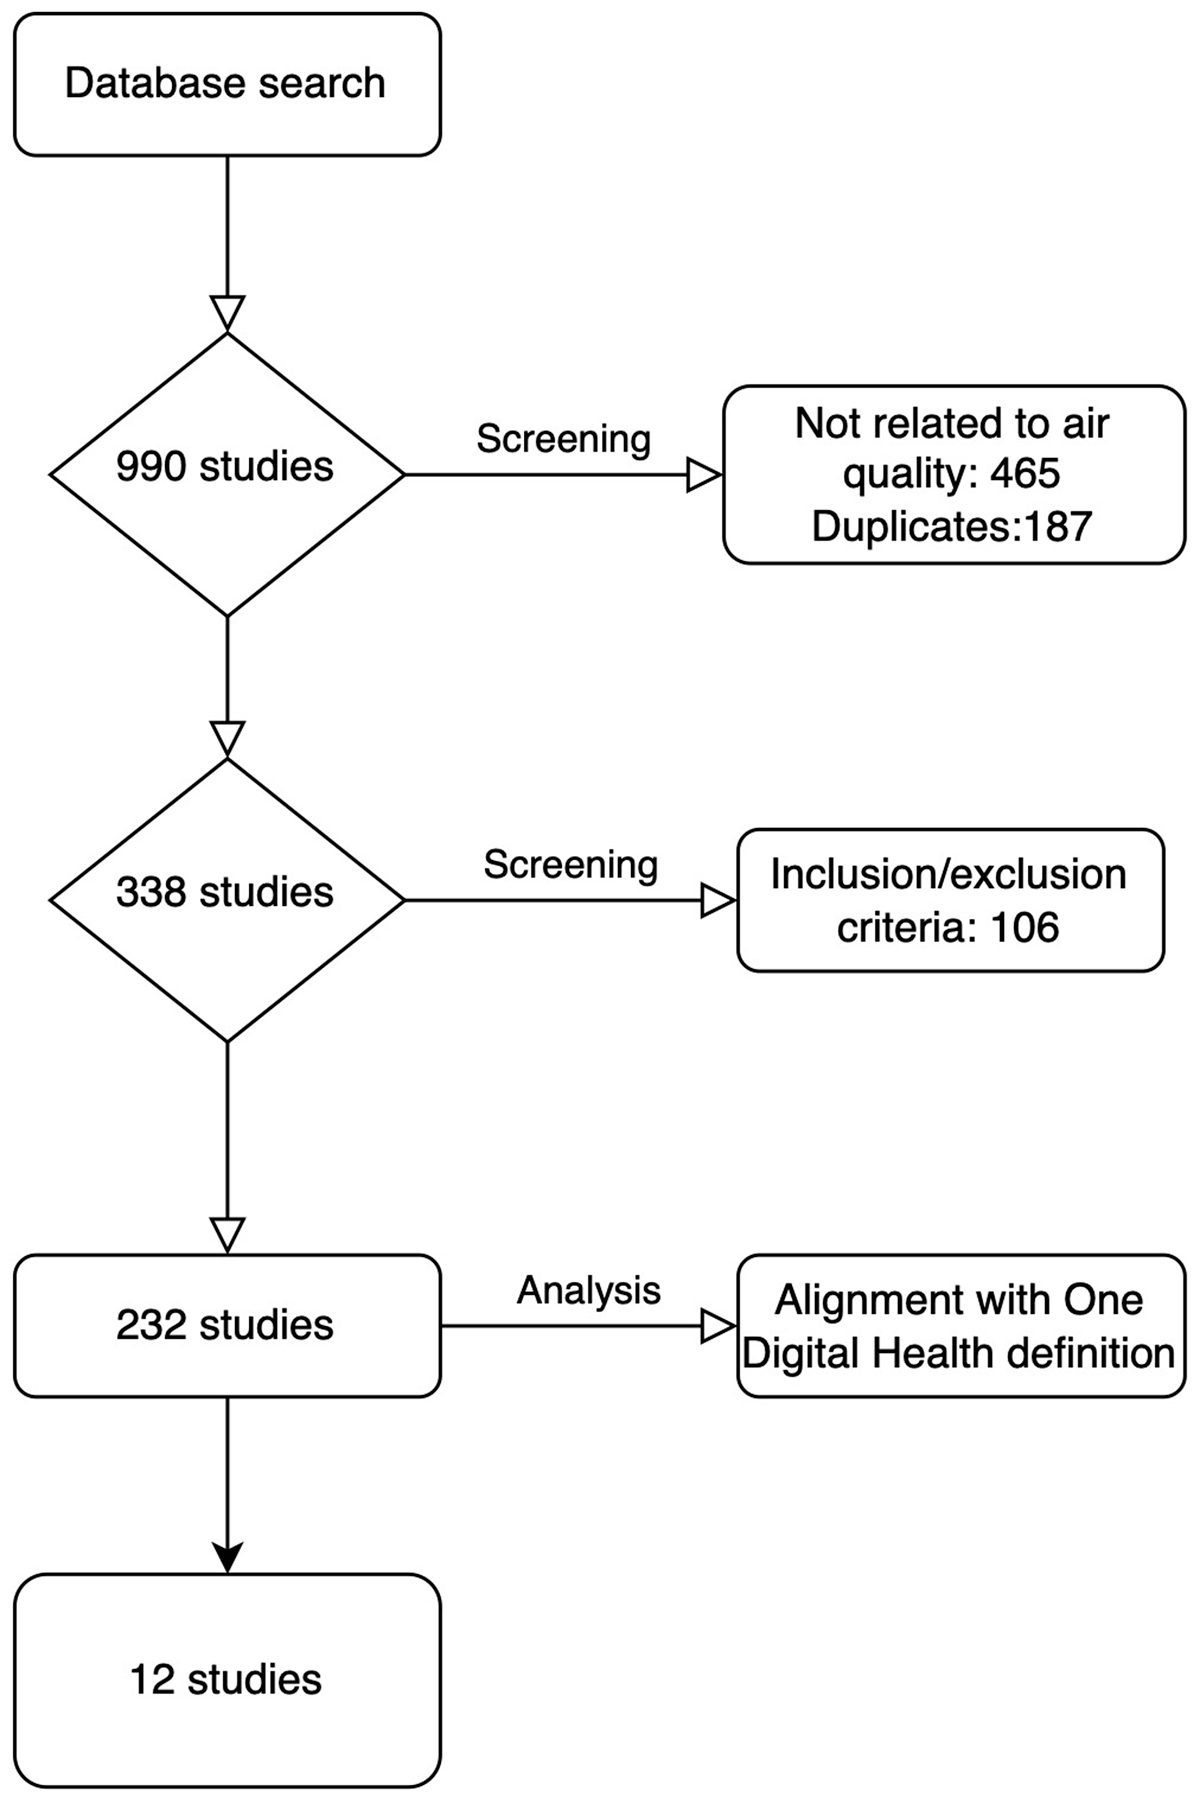 Diagram outlining the search strategy and number of studies included in the analysis